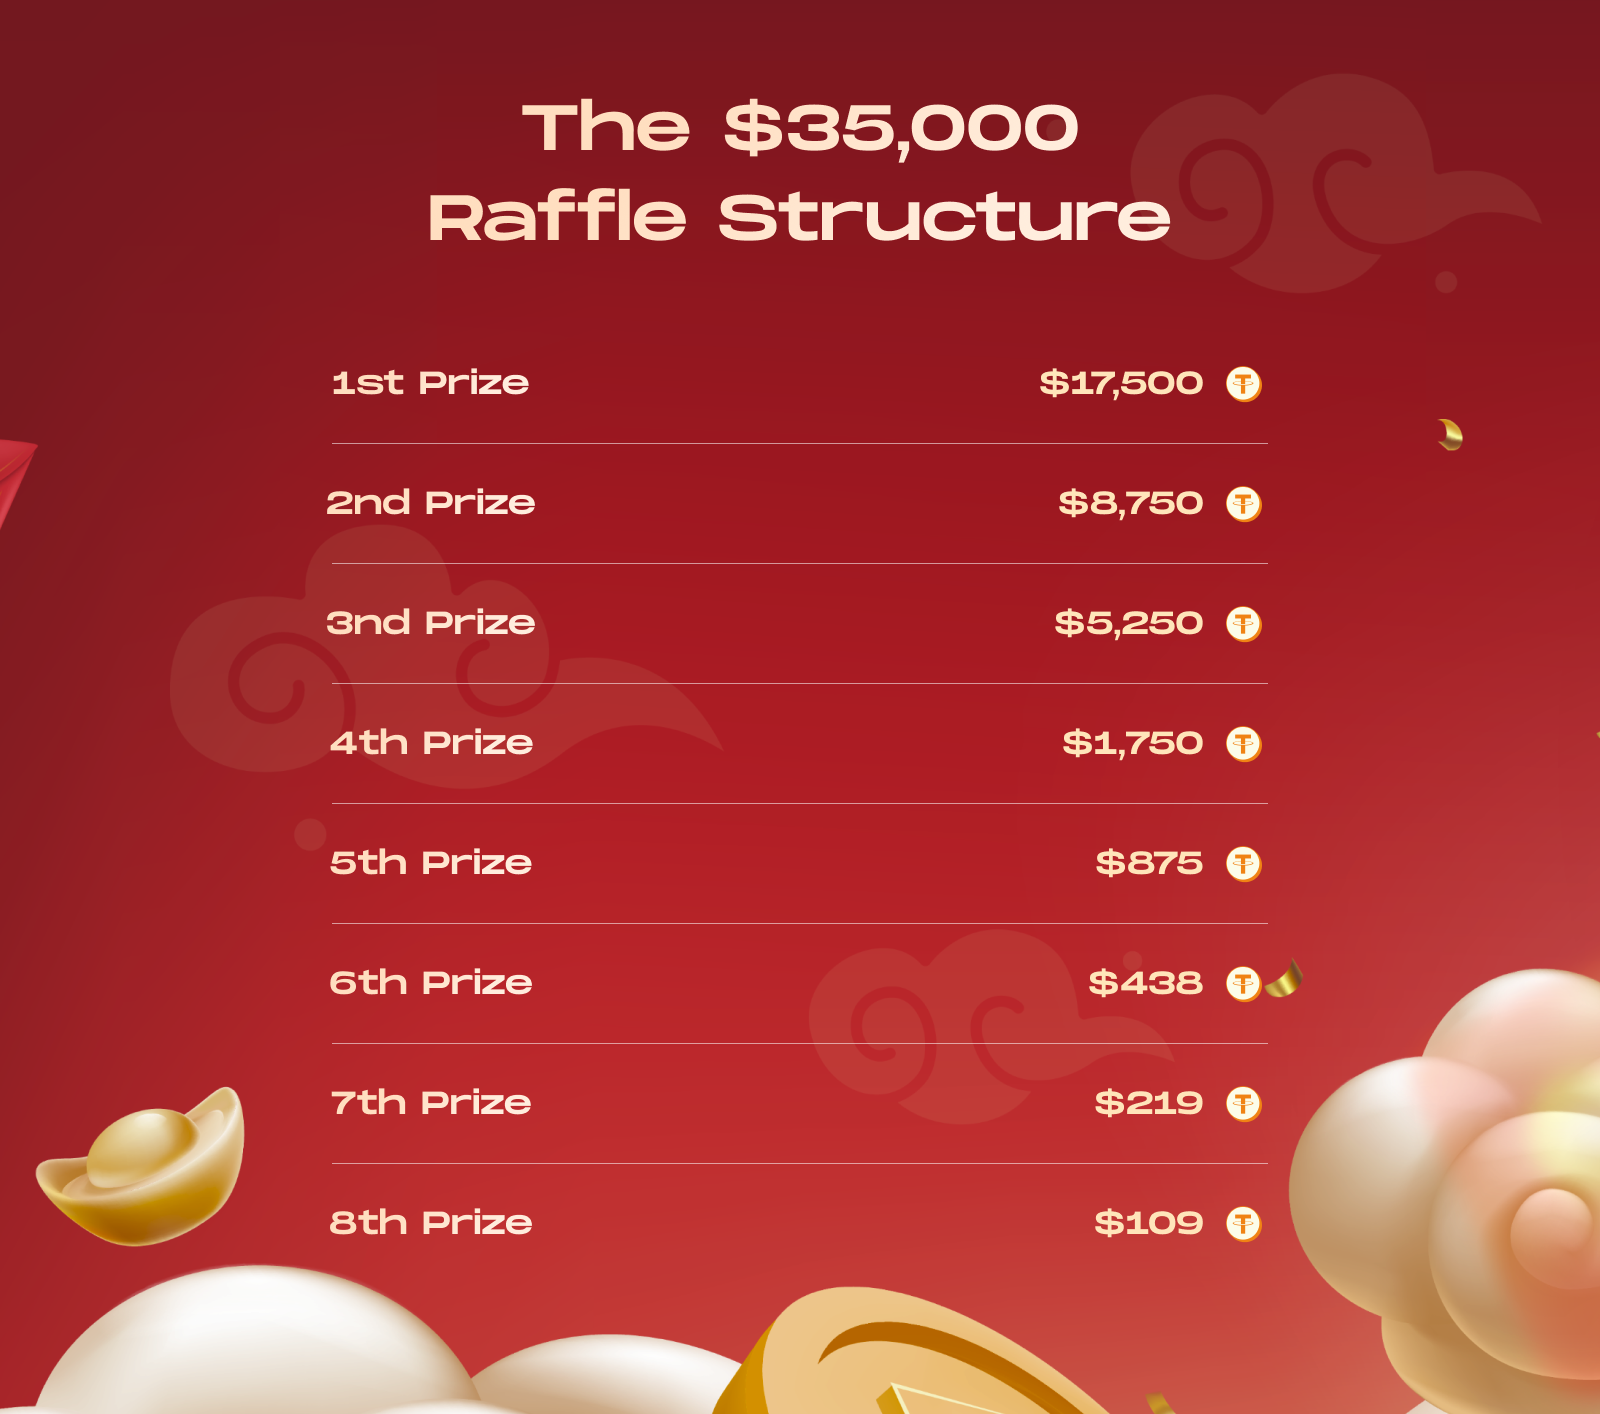 The $35,000 Raffle Structure